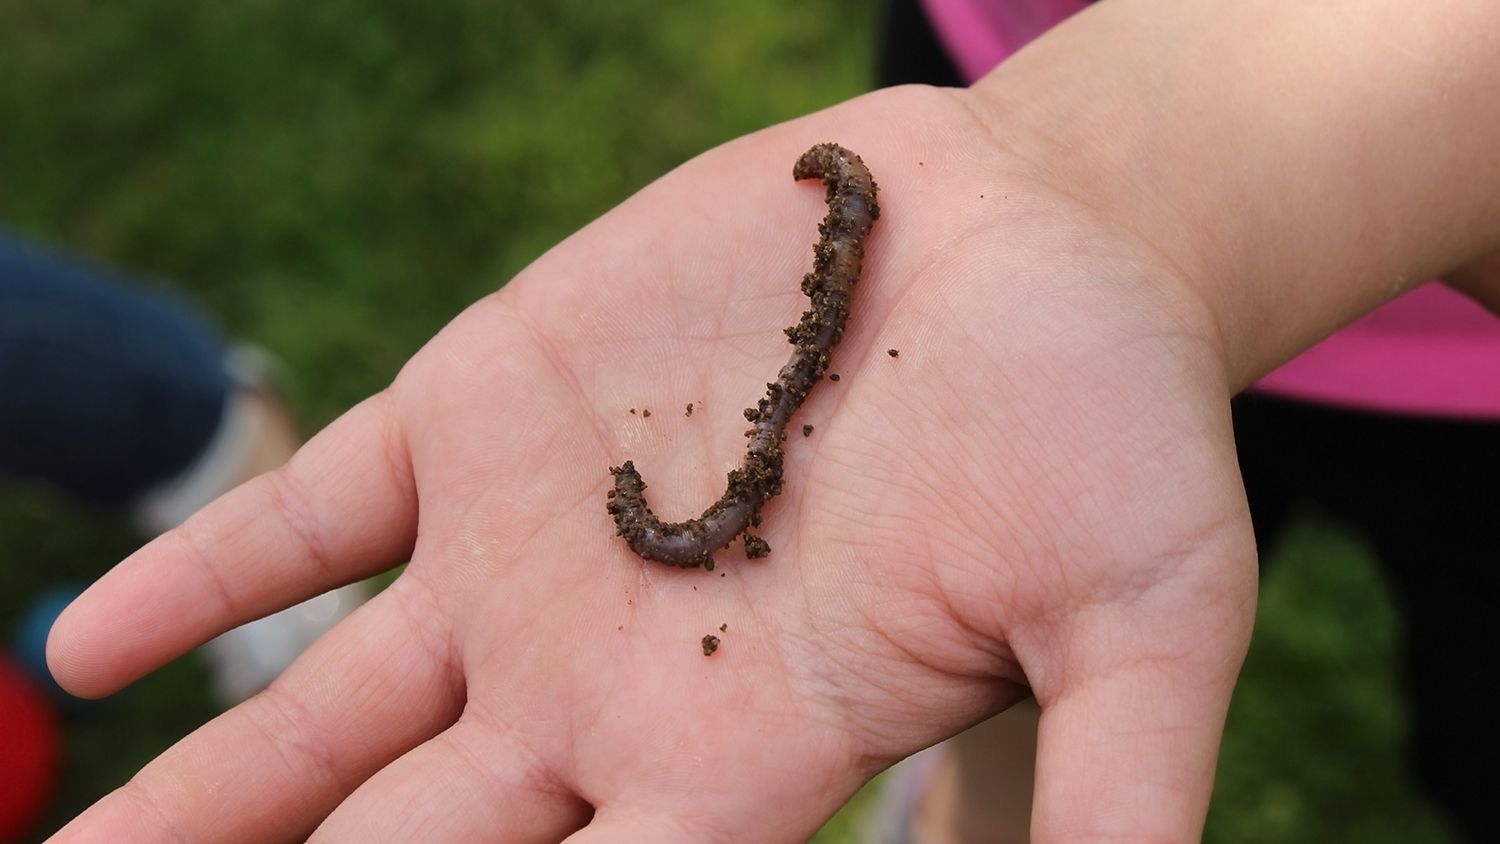 a worm in a child's palm.